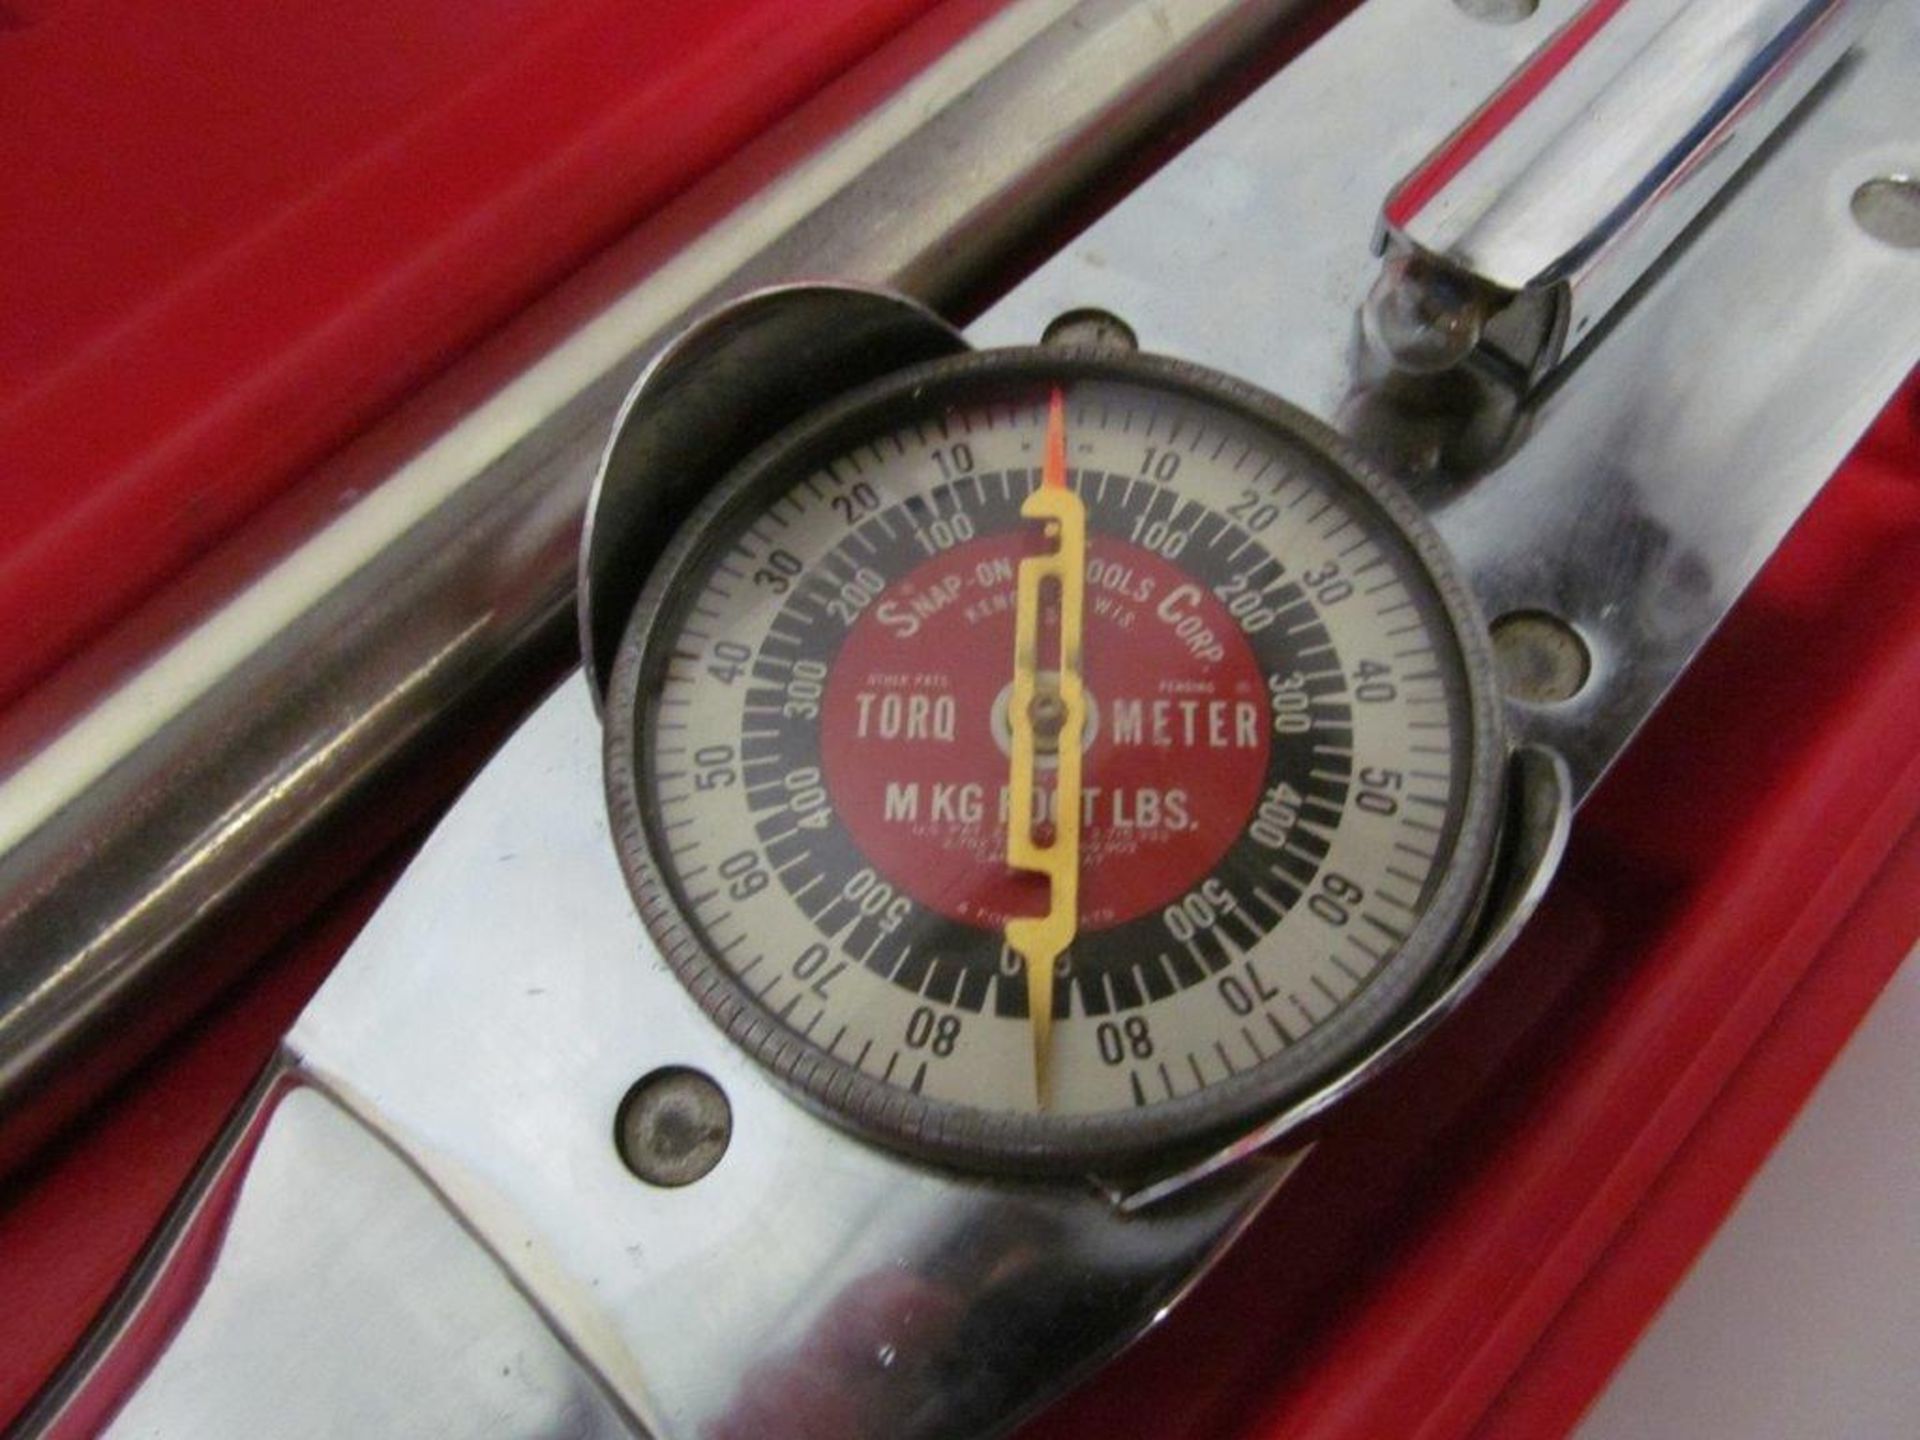 SNAP-ON-TOOLS TORQUE METER, 600 FT LB DRIVE, 3/4'', LOCATION, HAWKESBURY, ONTARIO - Image 2 of 2